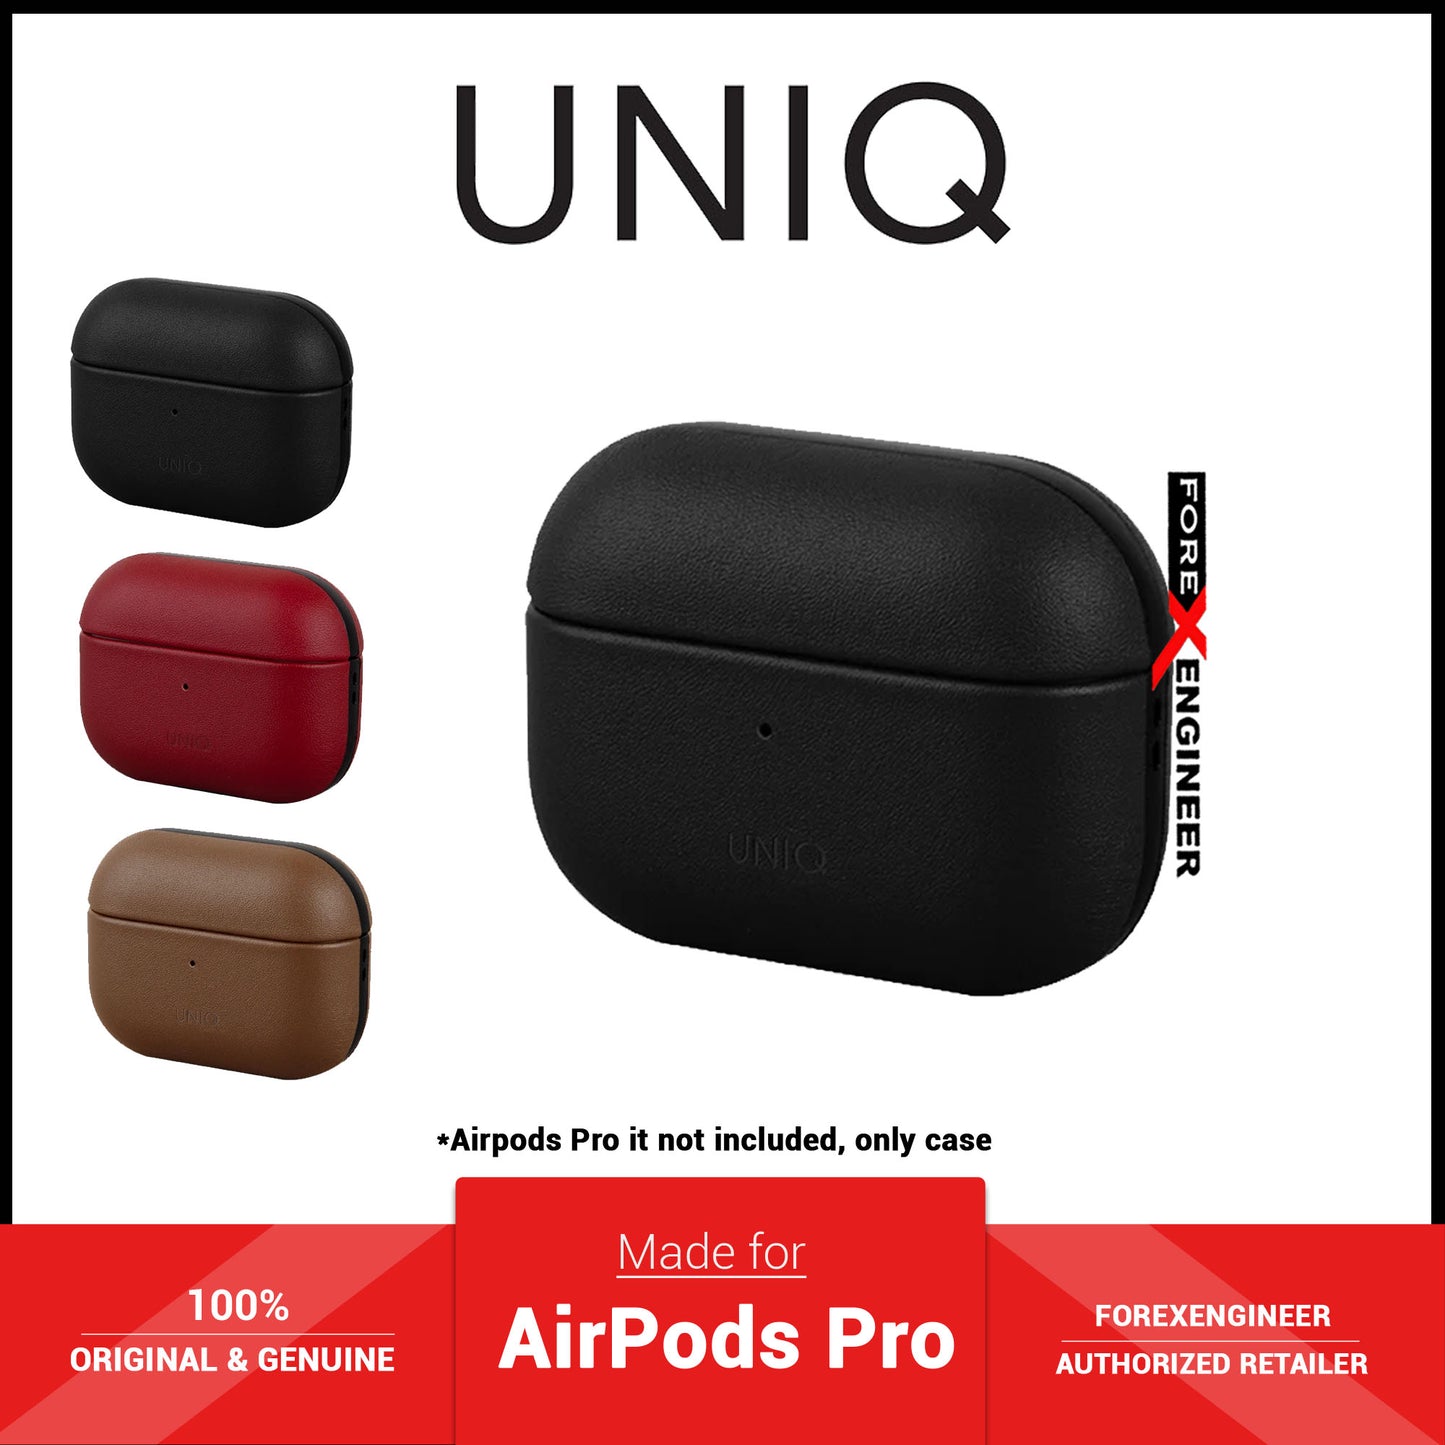 UNIQ Terra for Airpods Pro Case with Genuine Leather - Brown (Barcode: 8886463673126 )